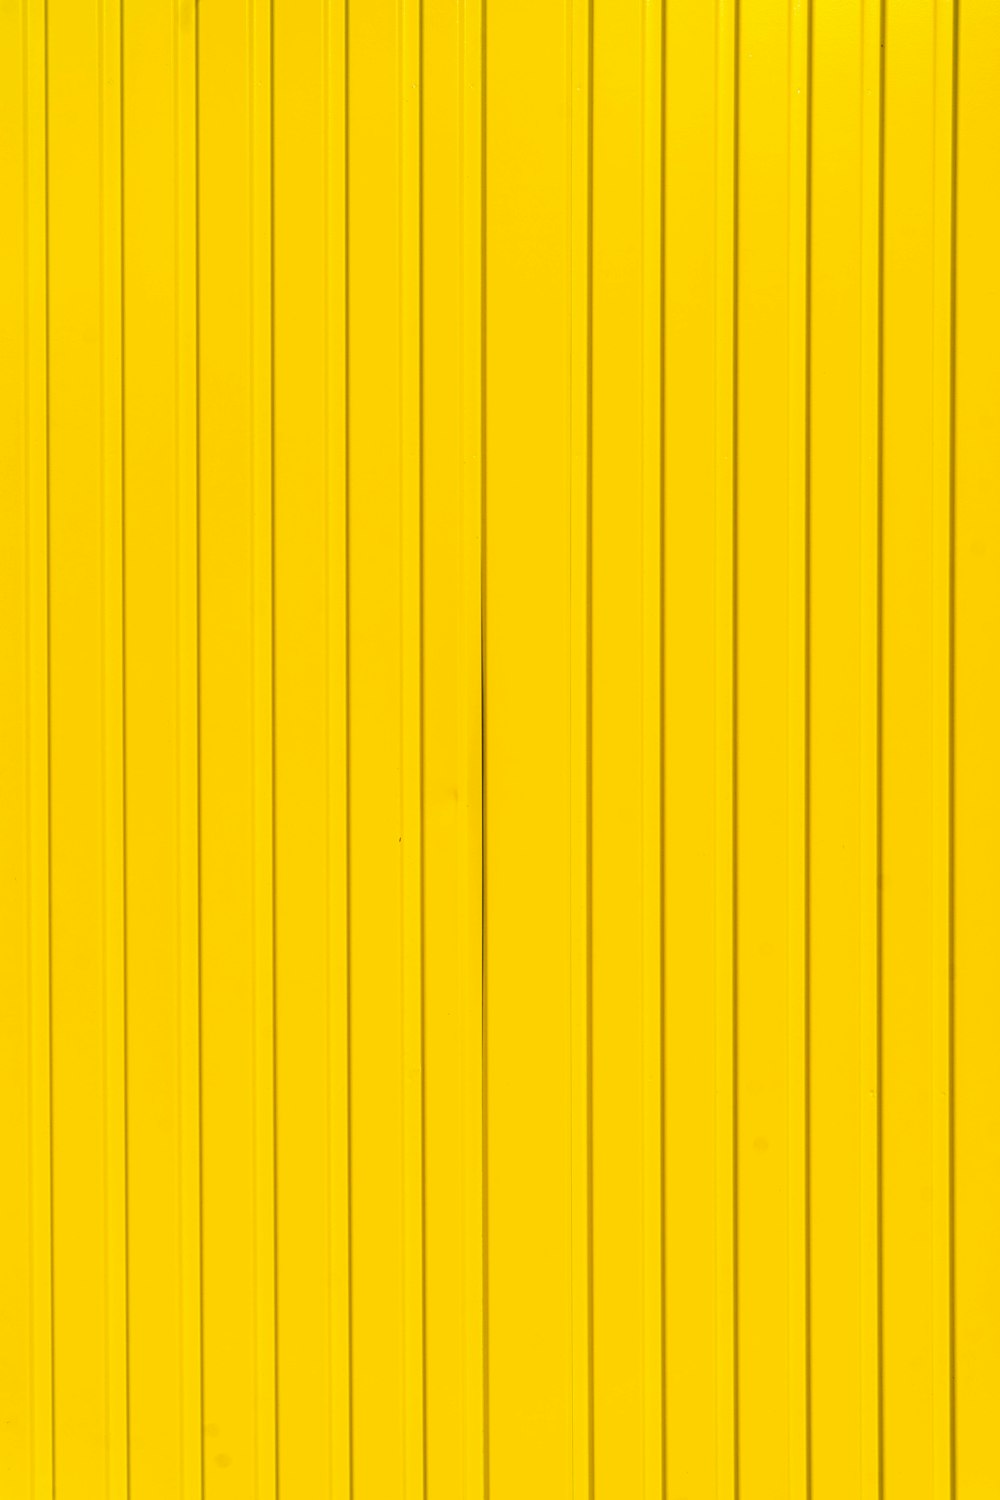 yellow and black striped background